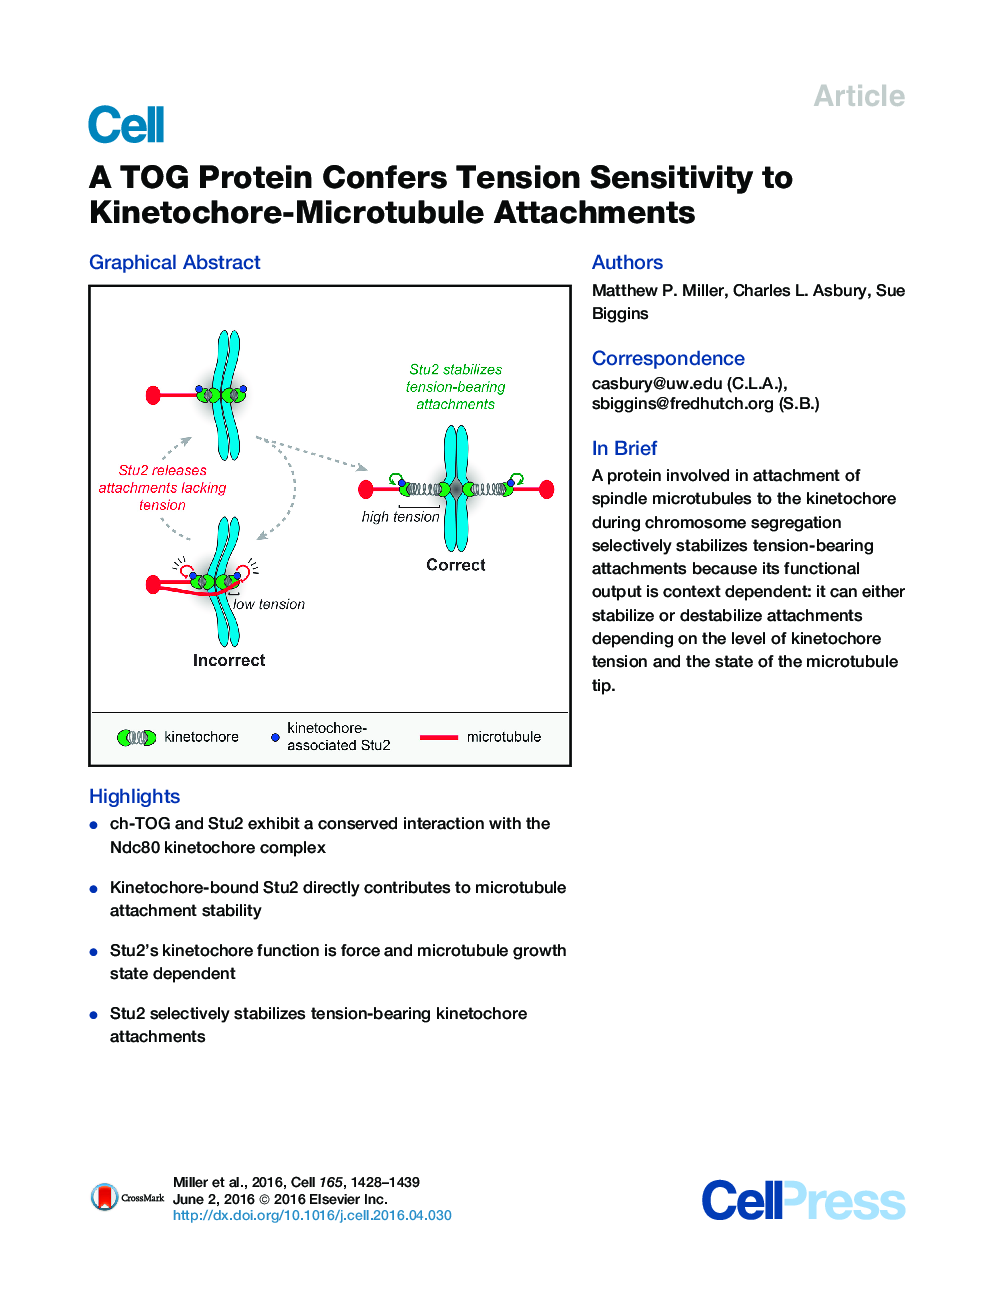 A TOG Protein Confers Tension Sensitivity to Kinetochore-Microtubule Attachments